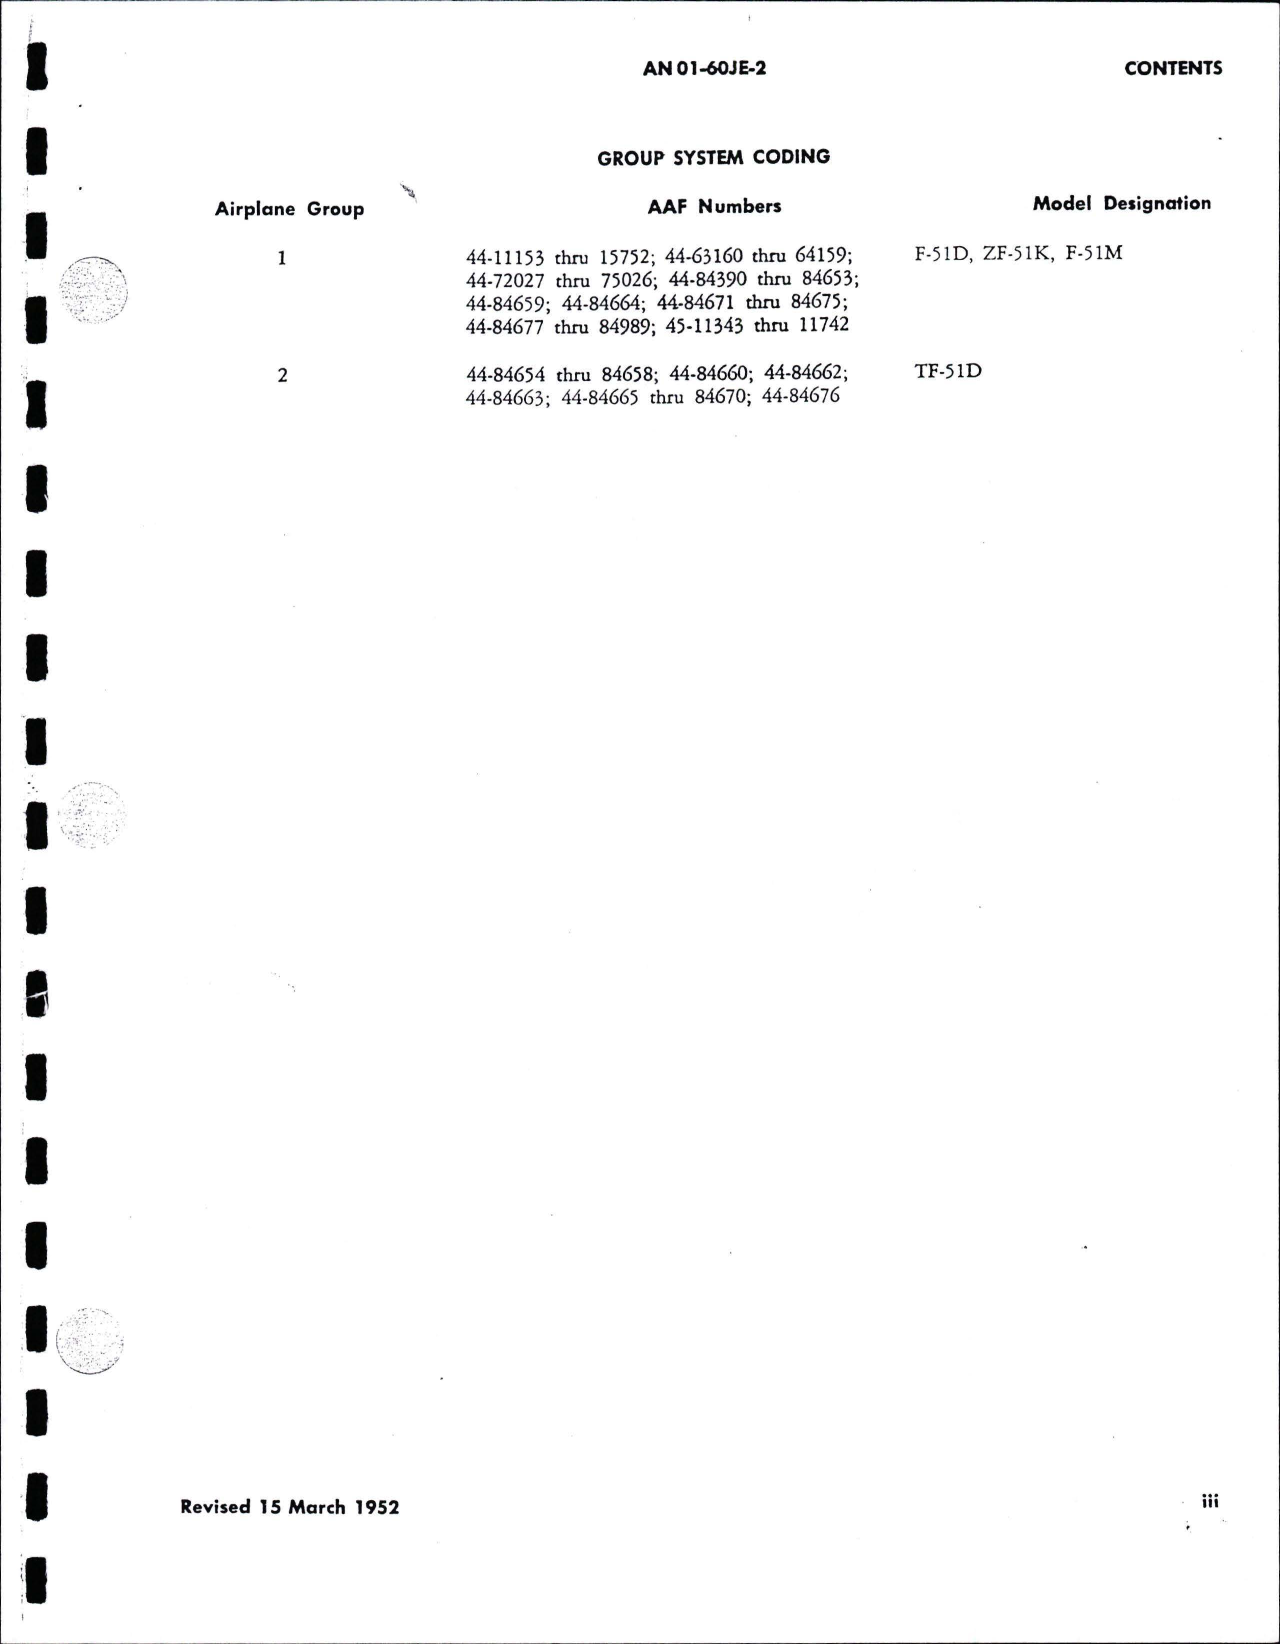 Sample page 7 from AirCorps Library document: Maintenance Instructions for F-51D, F-51M, ZF-51K, TF-51D